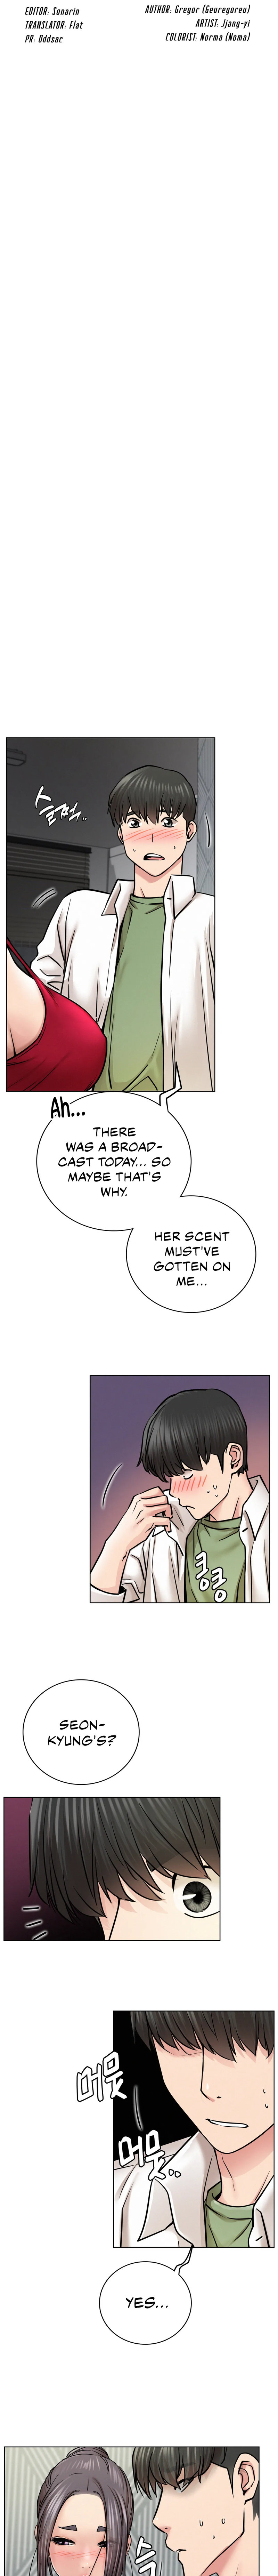 Staying with Ajumma - Chapter 55 Page 8